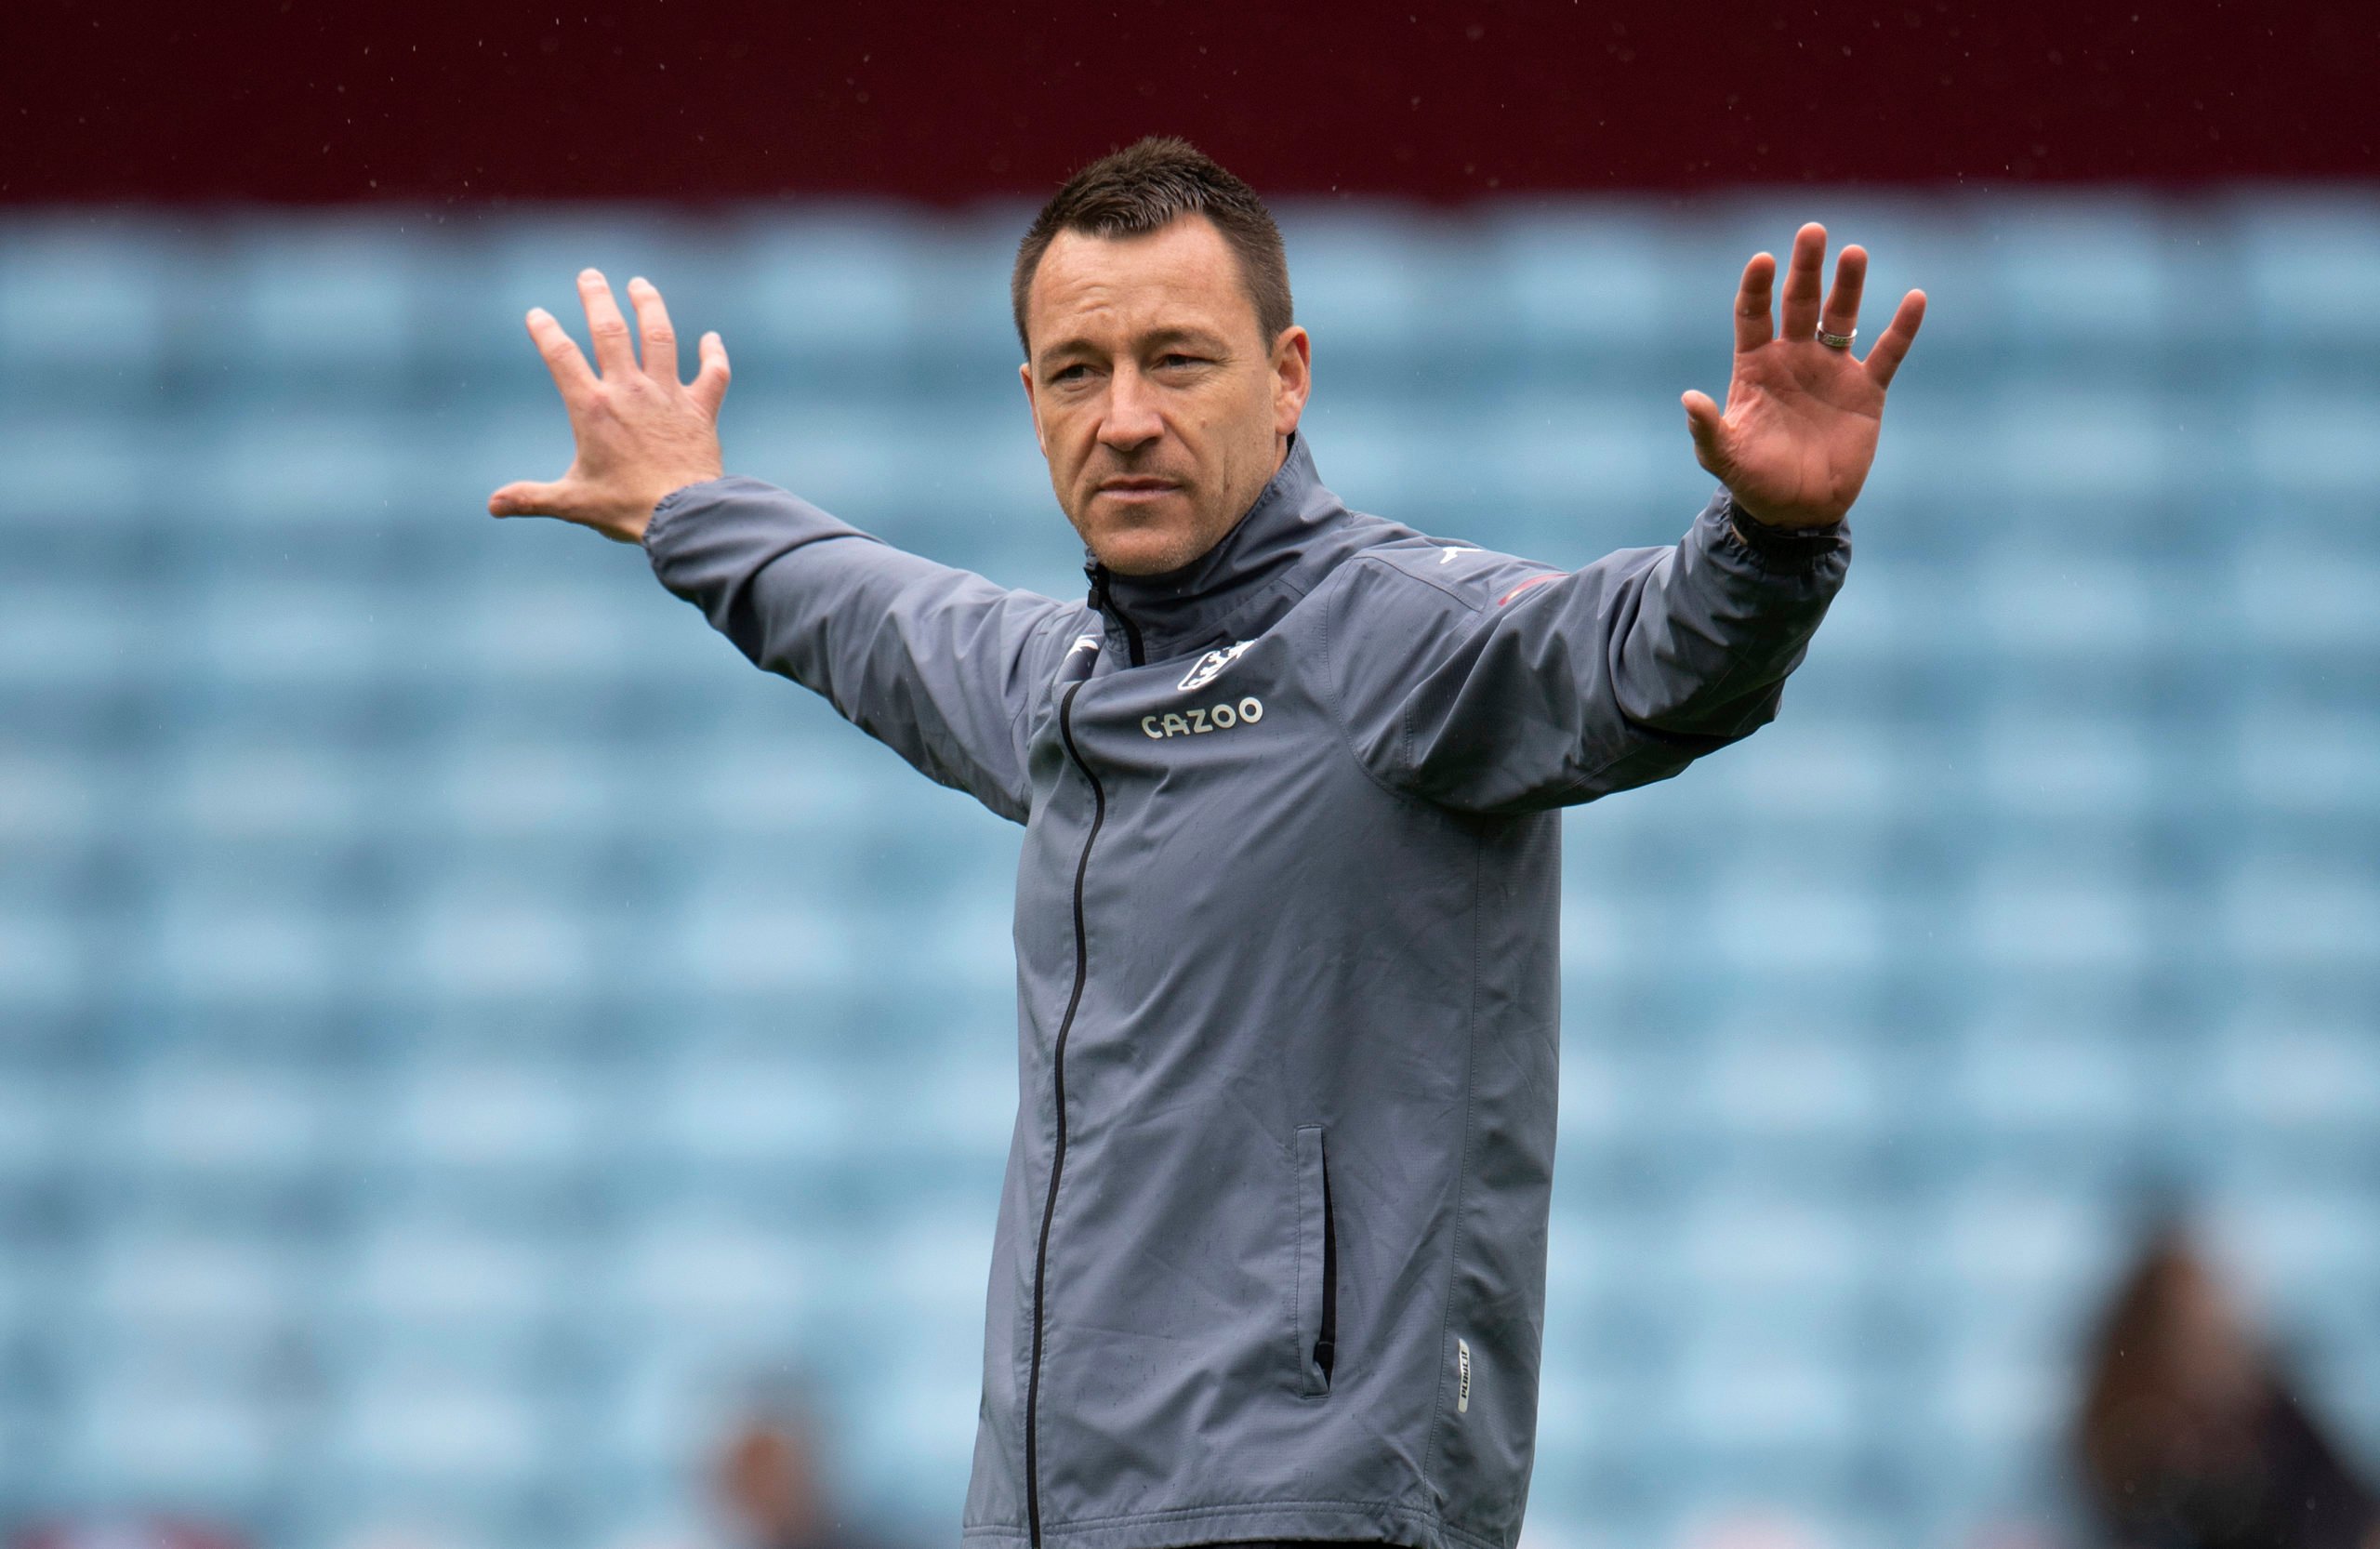 John Terry uploads post after Chelsea confirm his return in academy role, Cesc Fabregas and others respond